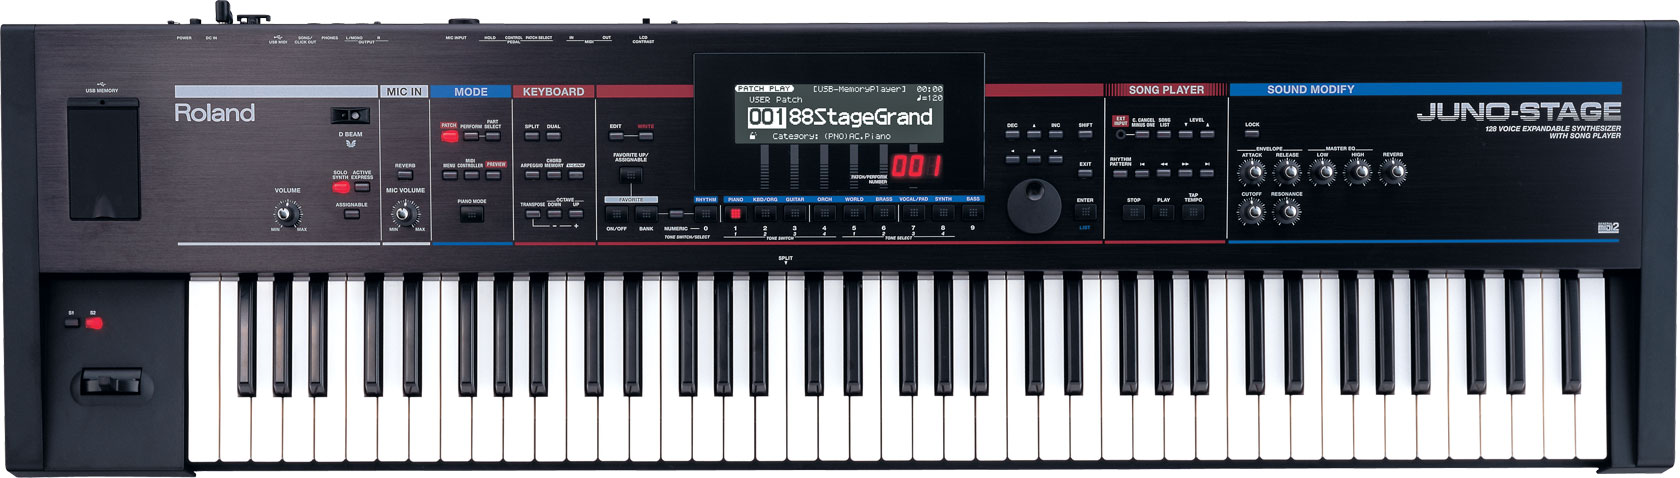 Frustrating Cloudy Assumptions, assumptions. Guess Roland - JUNO-STAGE | 128 Voice Expandable Synthesizer with Song Player